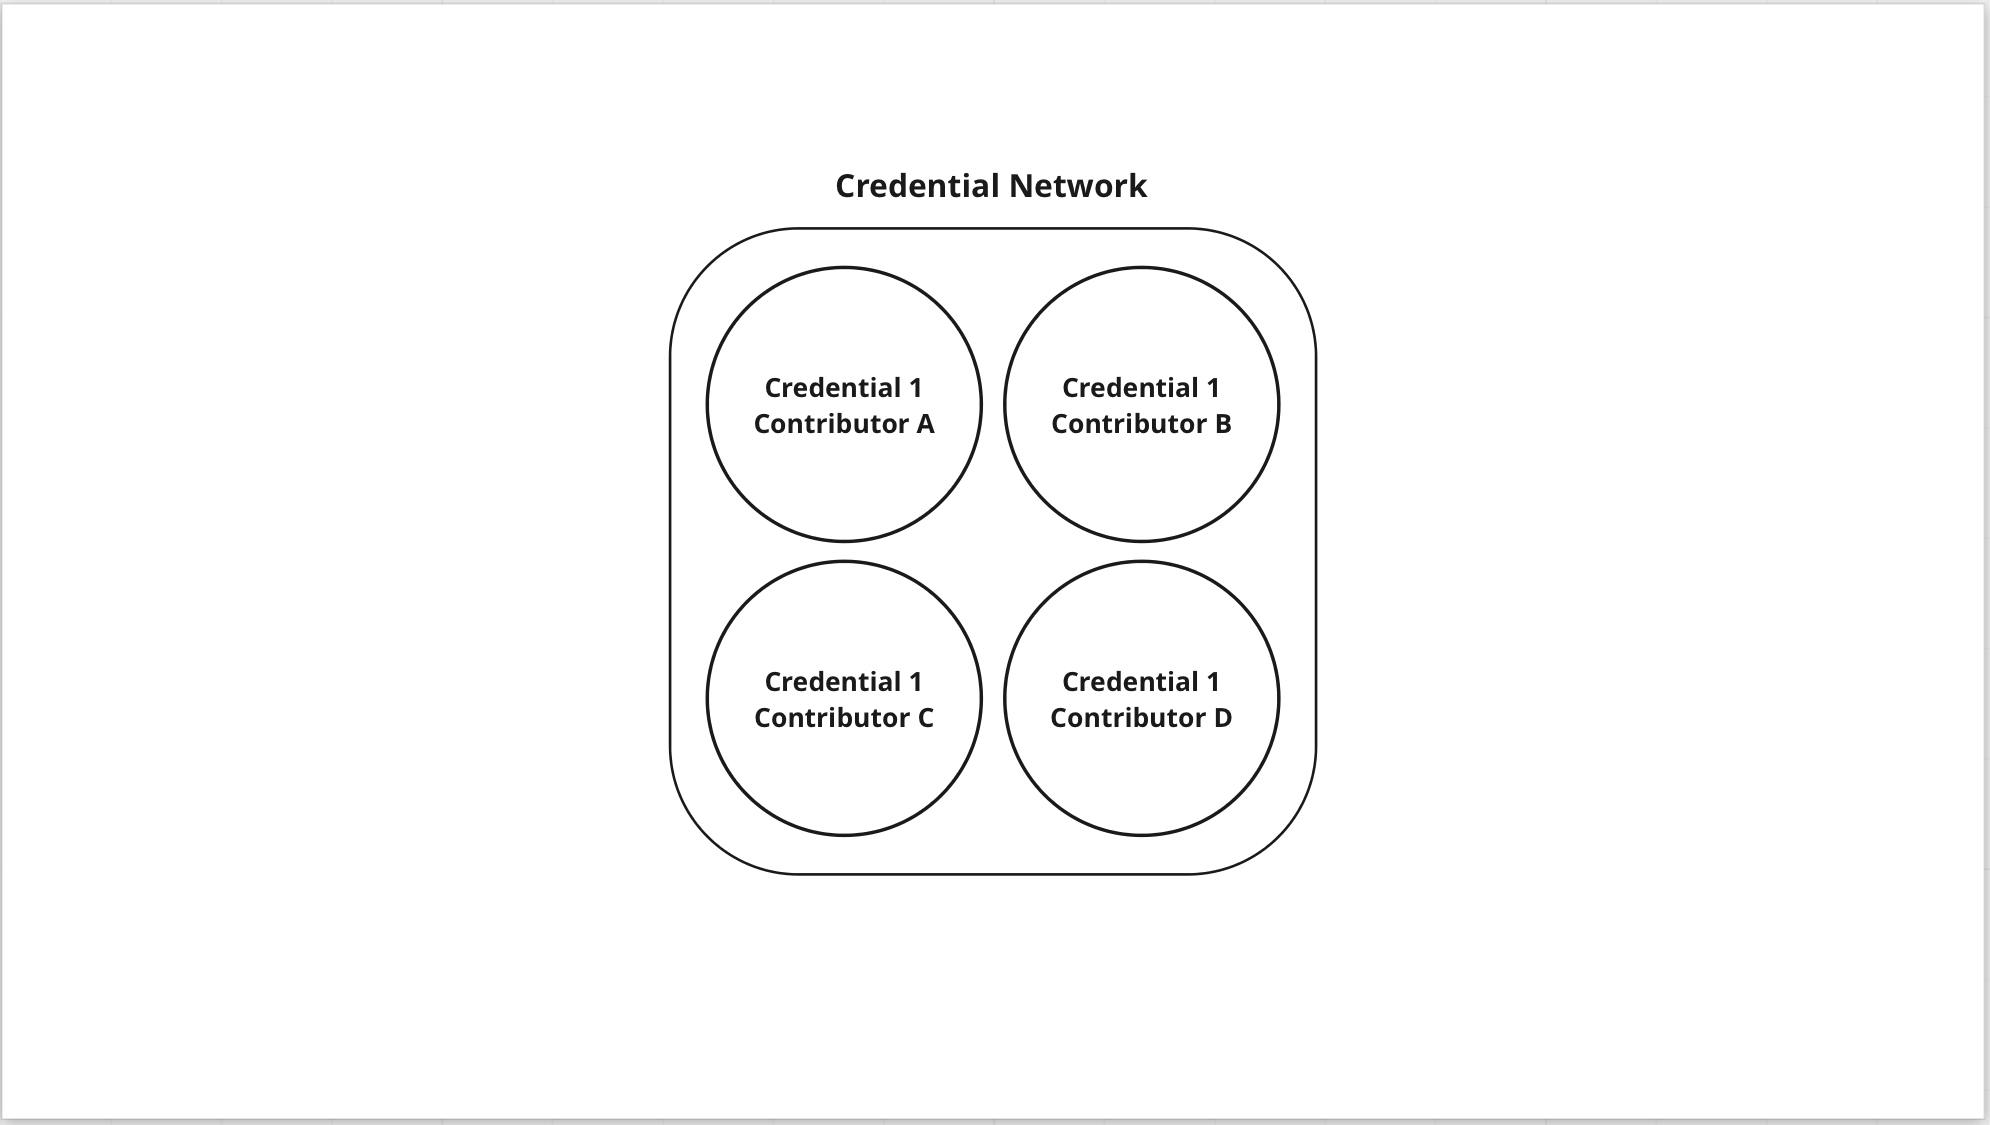 Fig 2. Credential Network